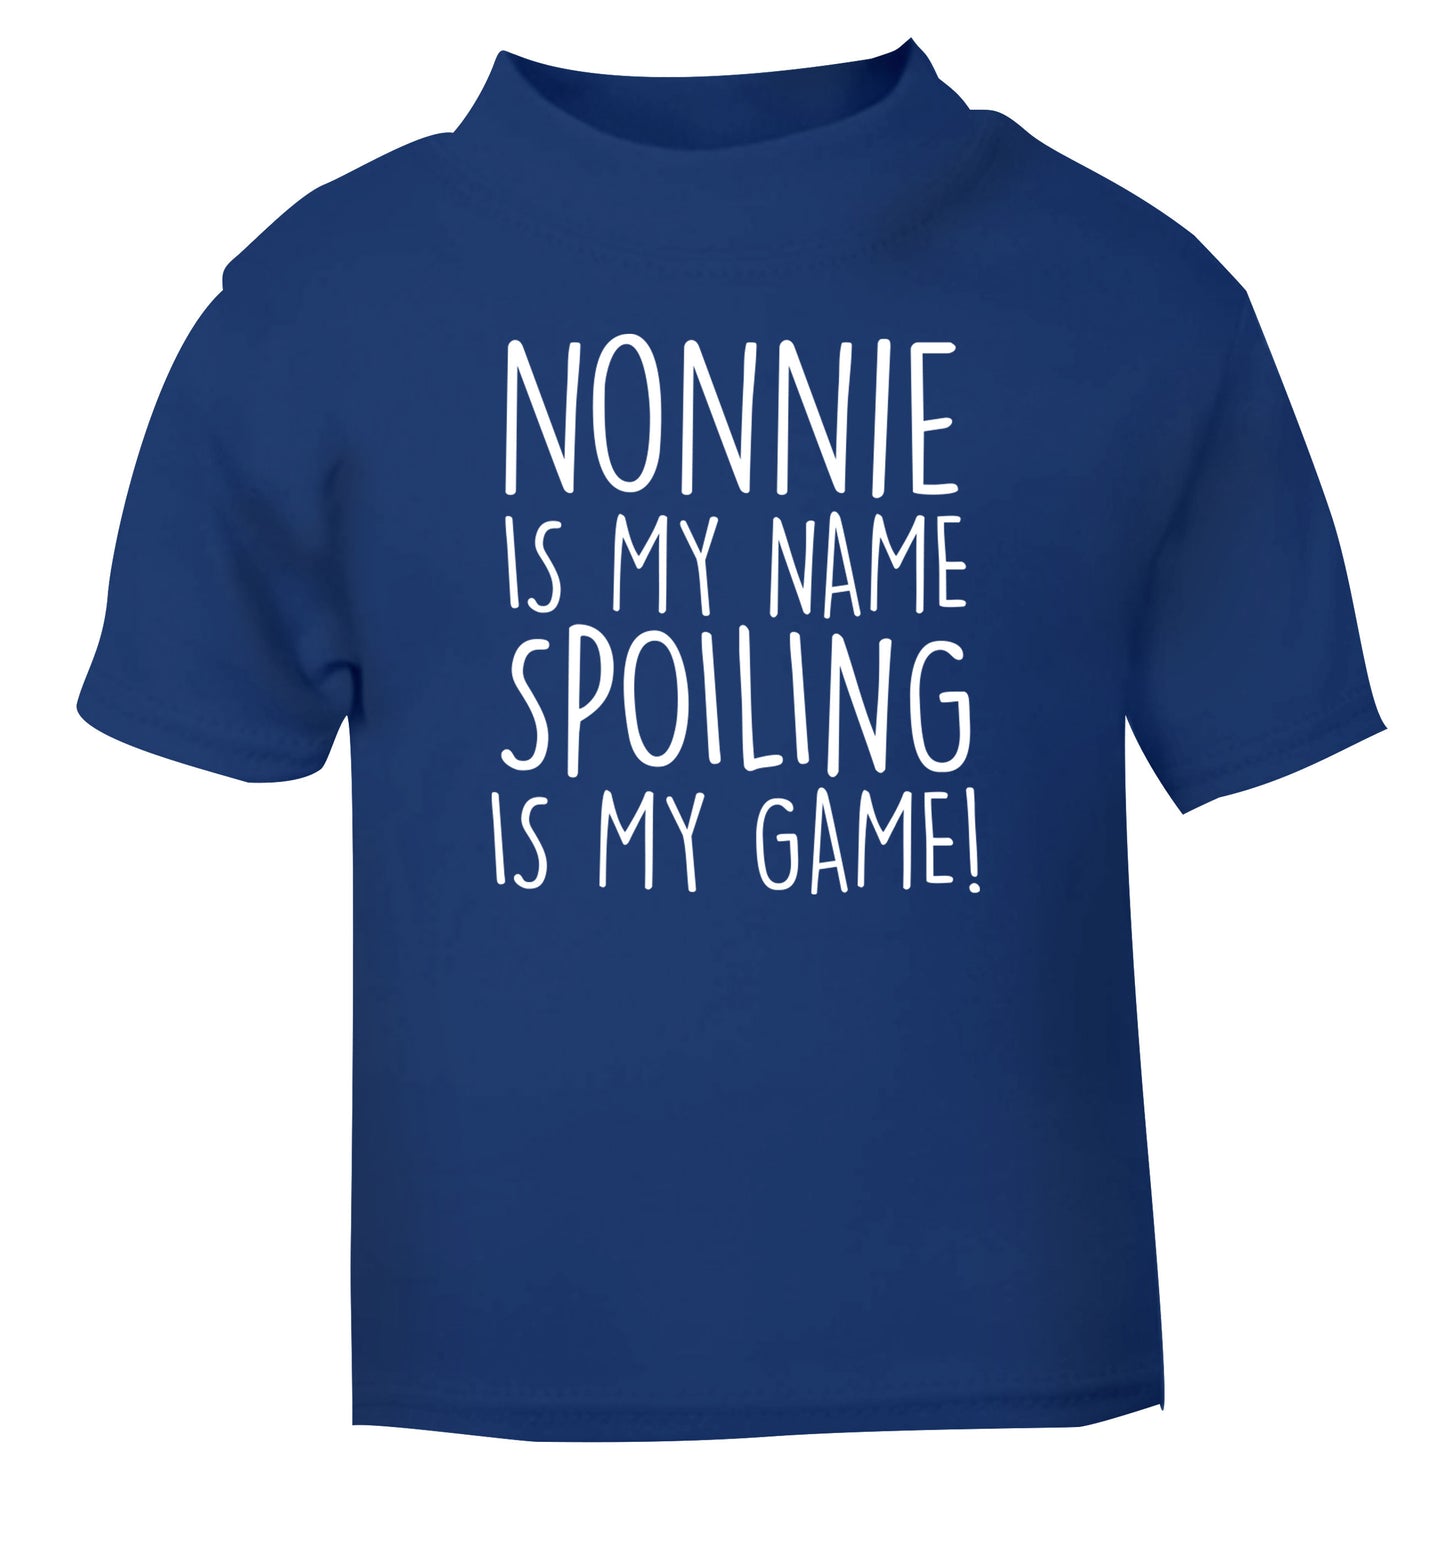 Nonnie is my name, spoiling is my game blue Baby Toddler Tshirt 2 Years